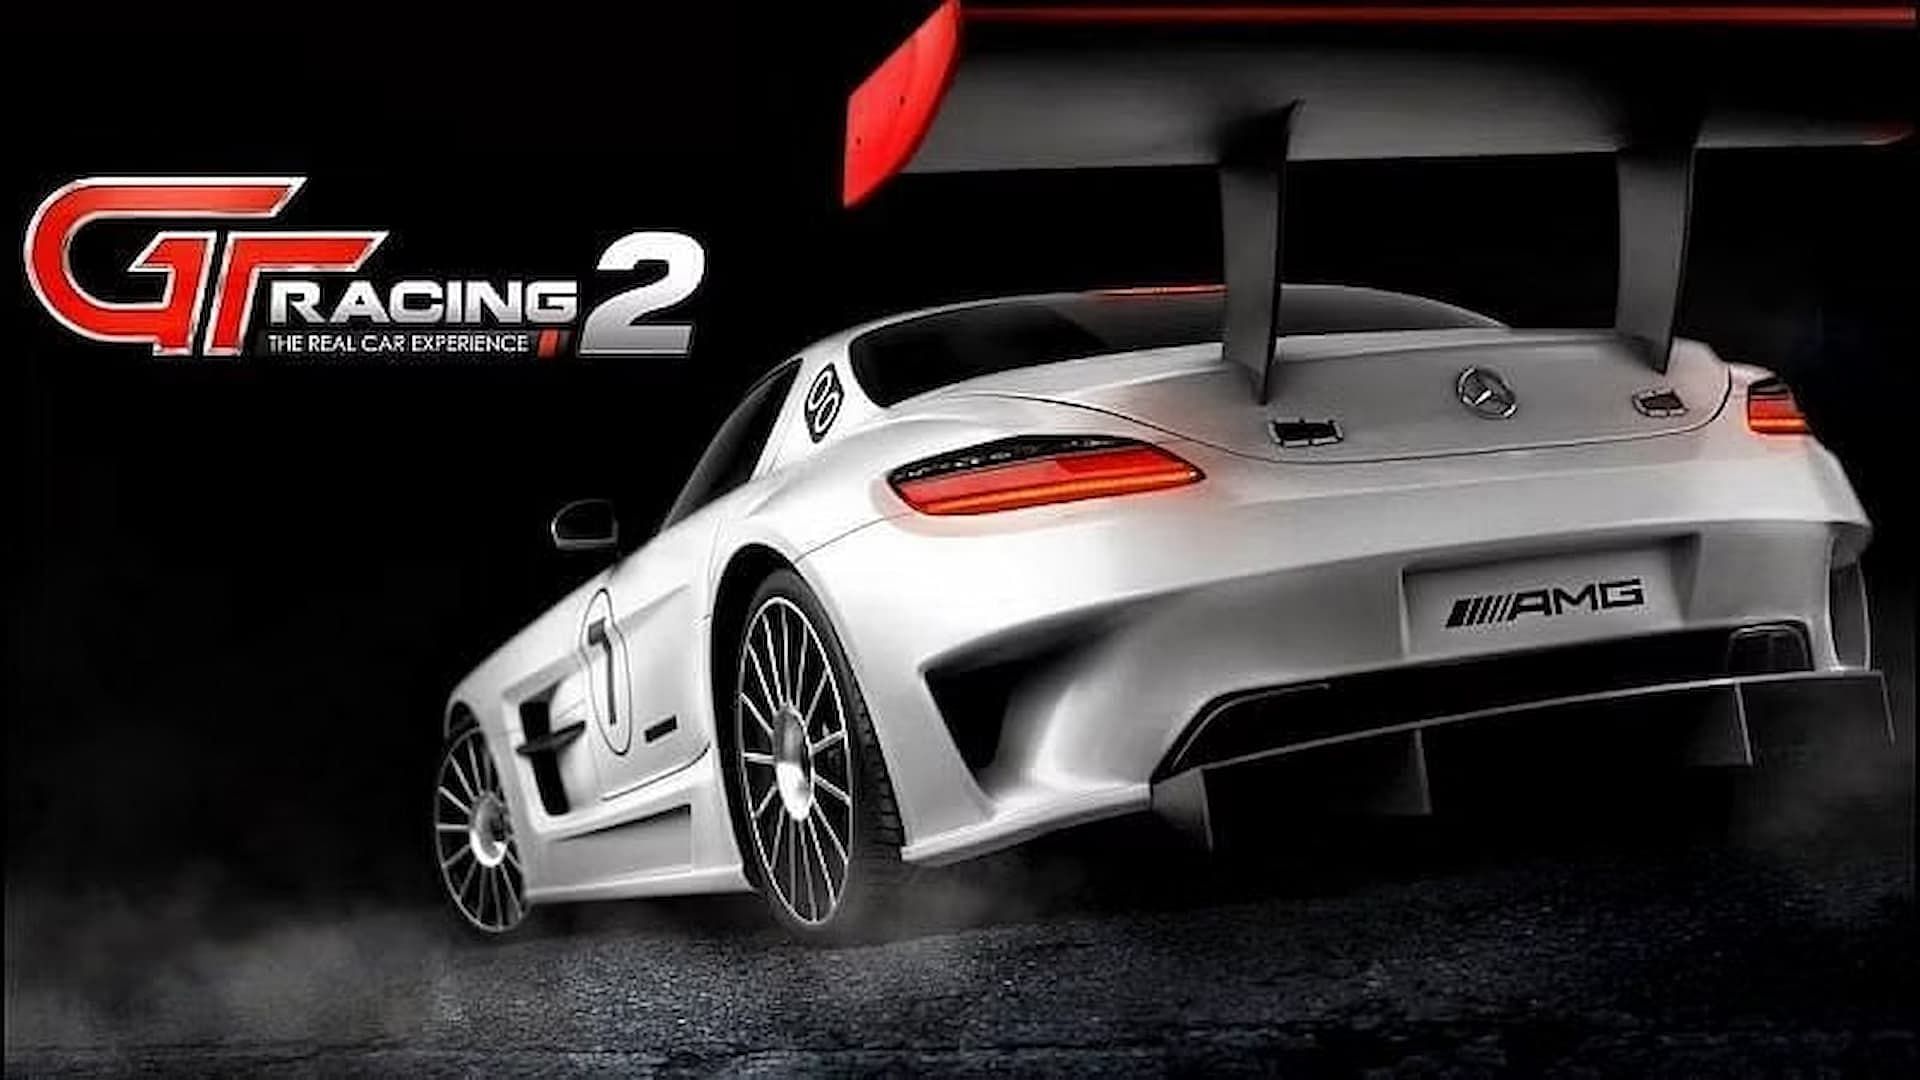 GT Racing 2: The Real Car Exp (Image via AndroidGameplay4You/YouTube)